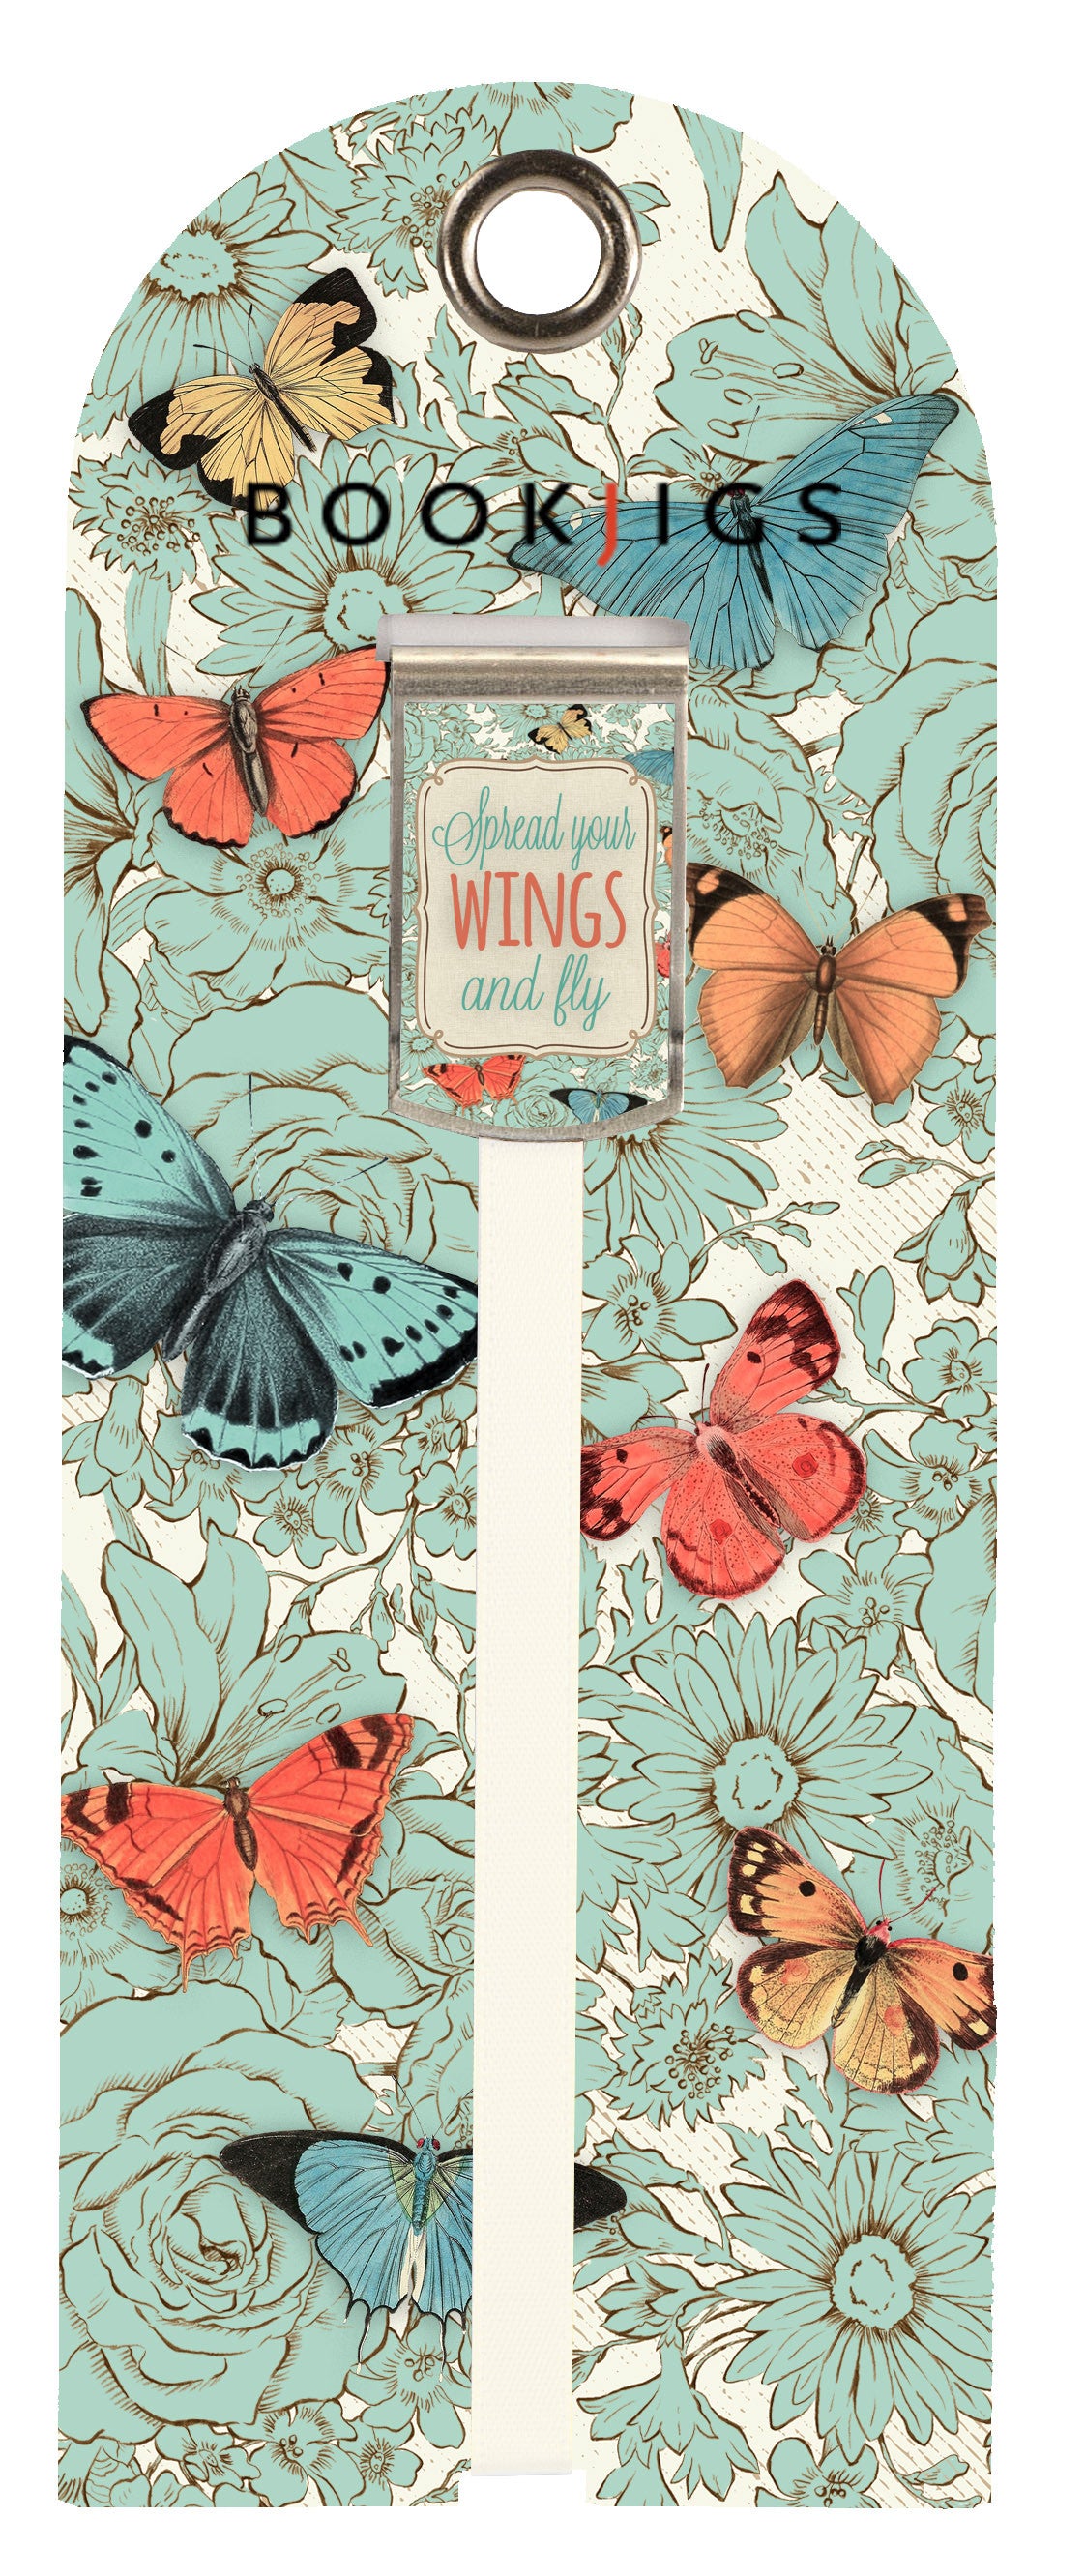 SKU : 1426 -Spread Your Wings and Fly - Bookjig